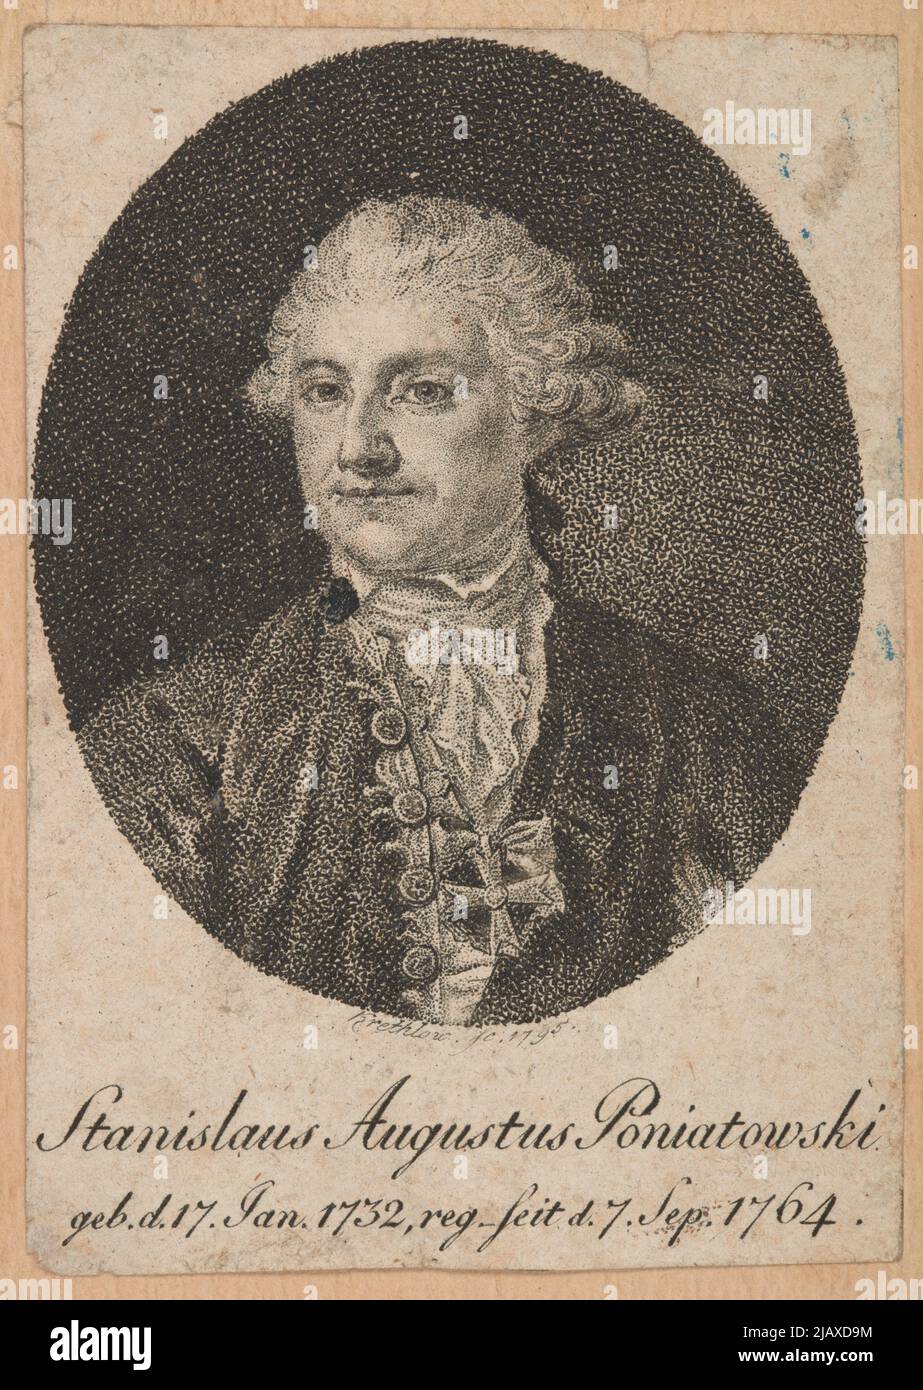 Stanislaus Augustus Poniatowski () [Stanisław August Poniatowski], Z: Historical and Genealogical Almanac for the Bissextile Year 1796  History of Poland with 2 Cards, 7 Portraits and 6 Historical Prints by D. Chodowiecki, Berlin, Oraz: Historical Genealogical calendar on the switch = year 1796. Contains the story of Poland, Berlin 1796 Krethlow, Johann Ferdinand (1767 1842) Stock Photo